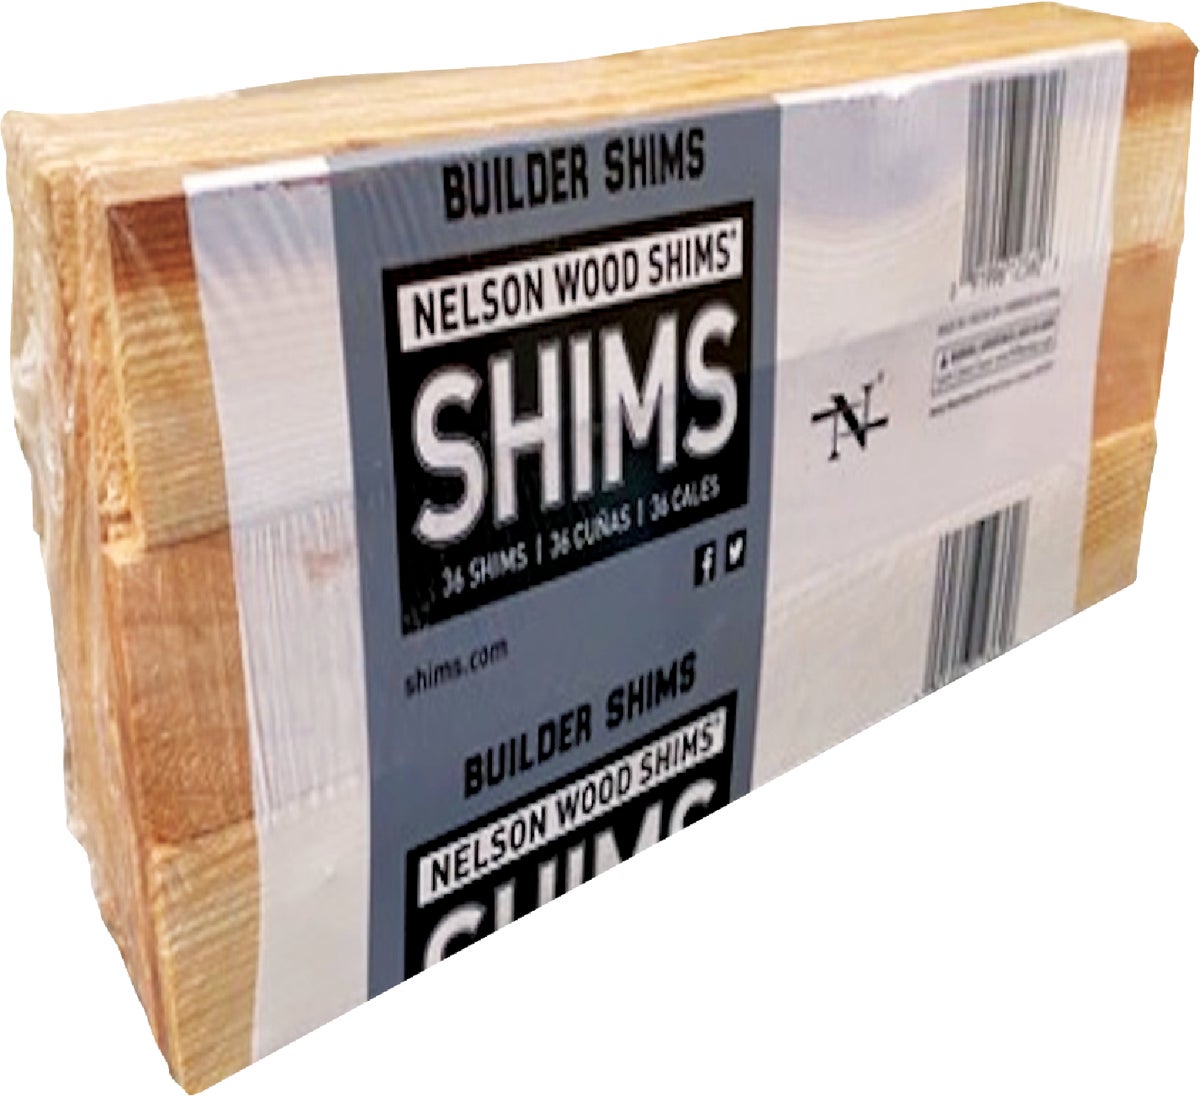 60 total 5 12 shims per package LOT of Composite Nelson Wood Shims Packages 